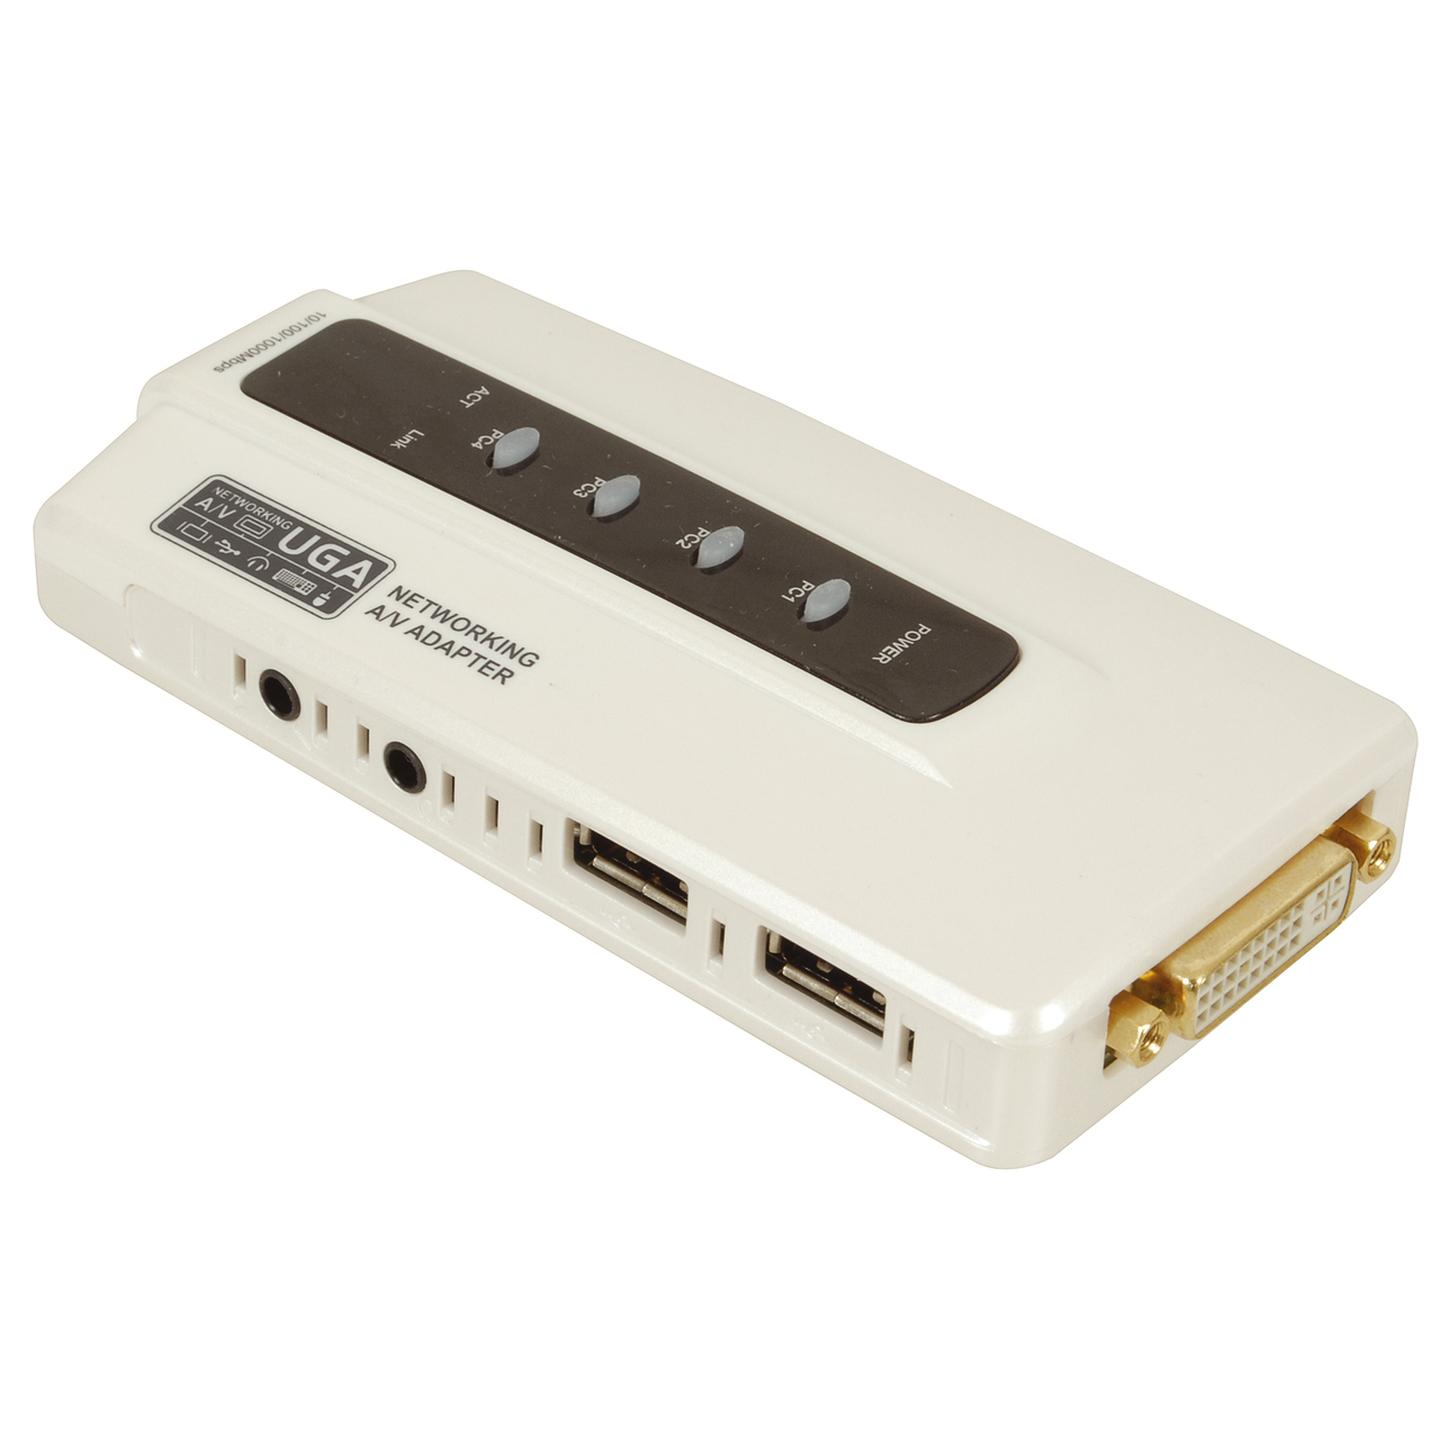 Remote PC Control Over Ethernet Adaptor 1080p